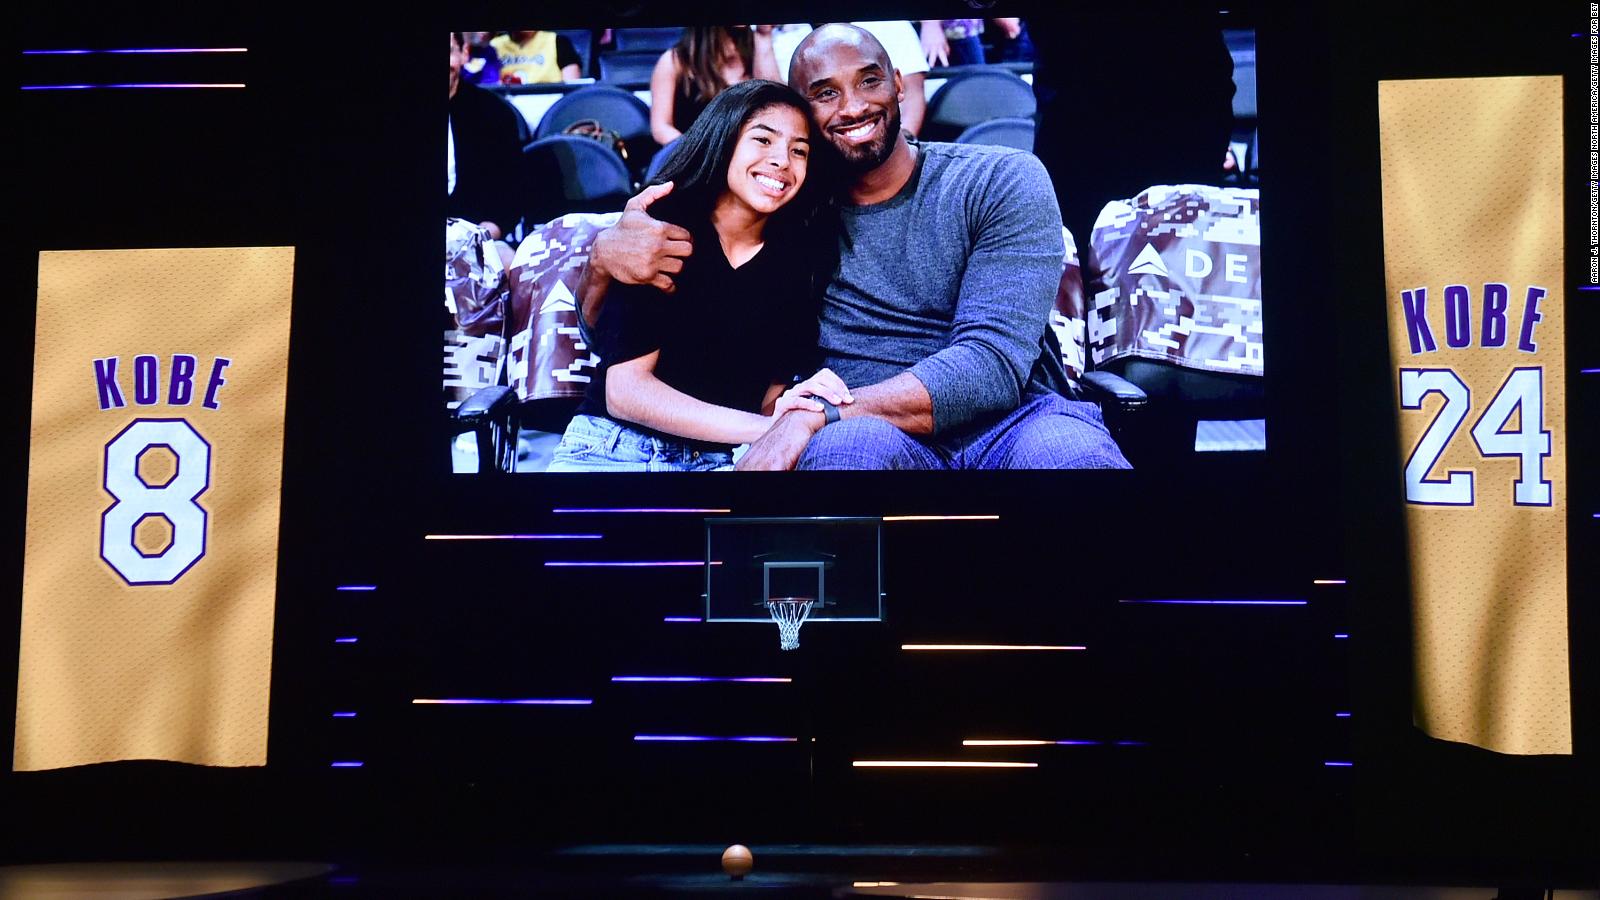 Kobe Bryant Celebration Of Life The World Says Goodbye To The Lakers Legend And His Daughter With Star Studded Tributes Cnn